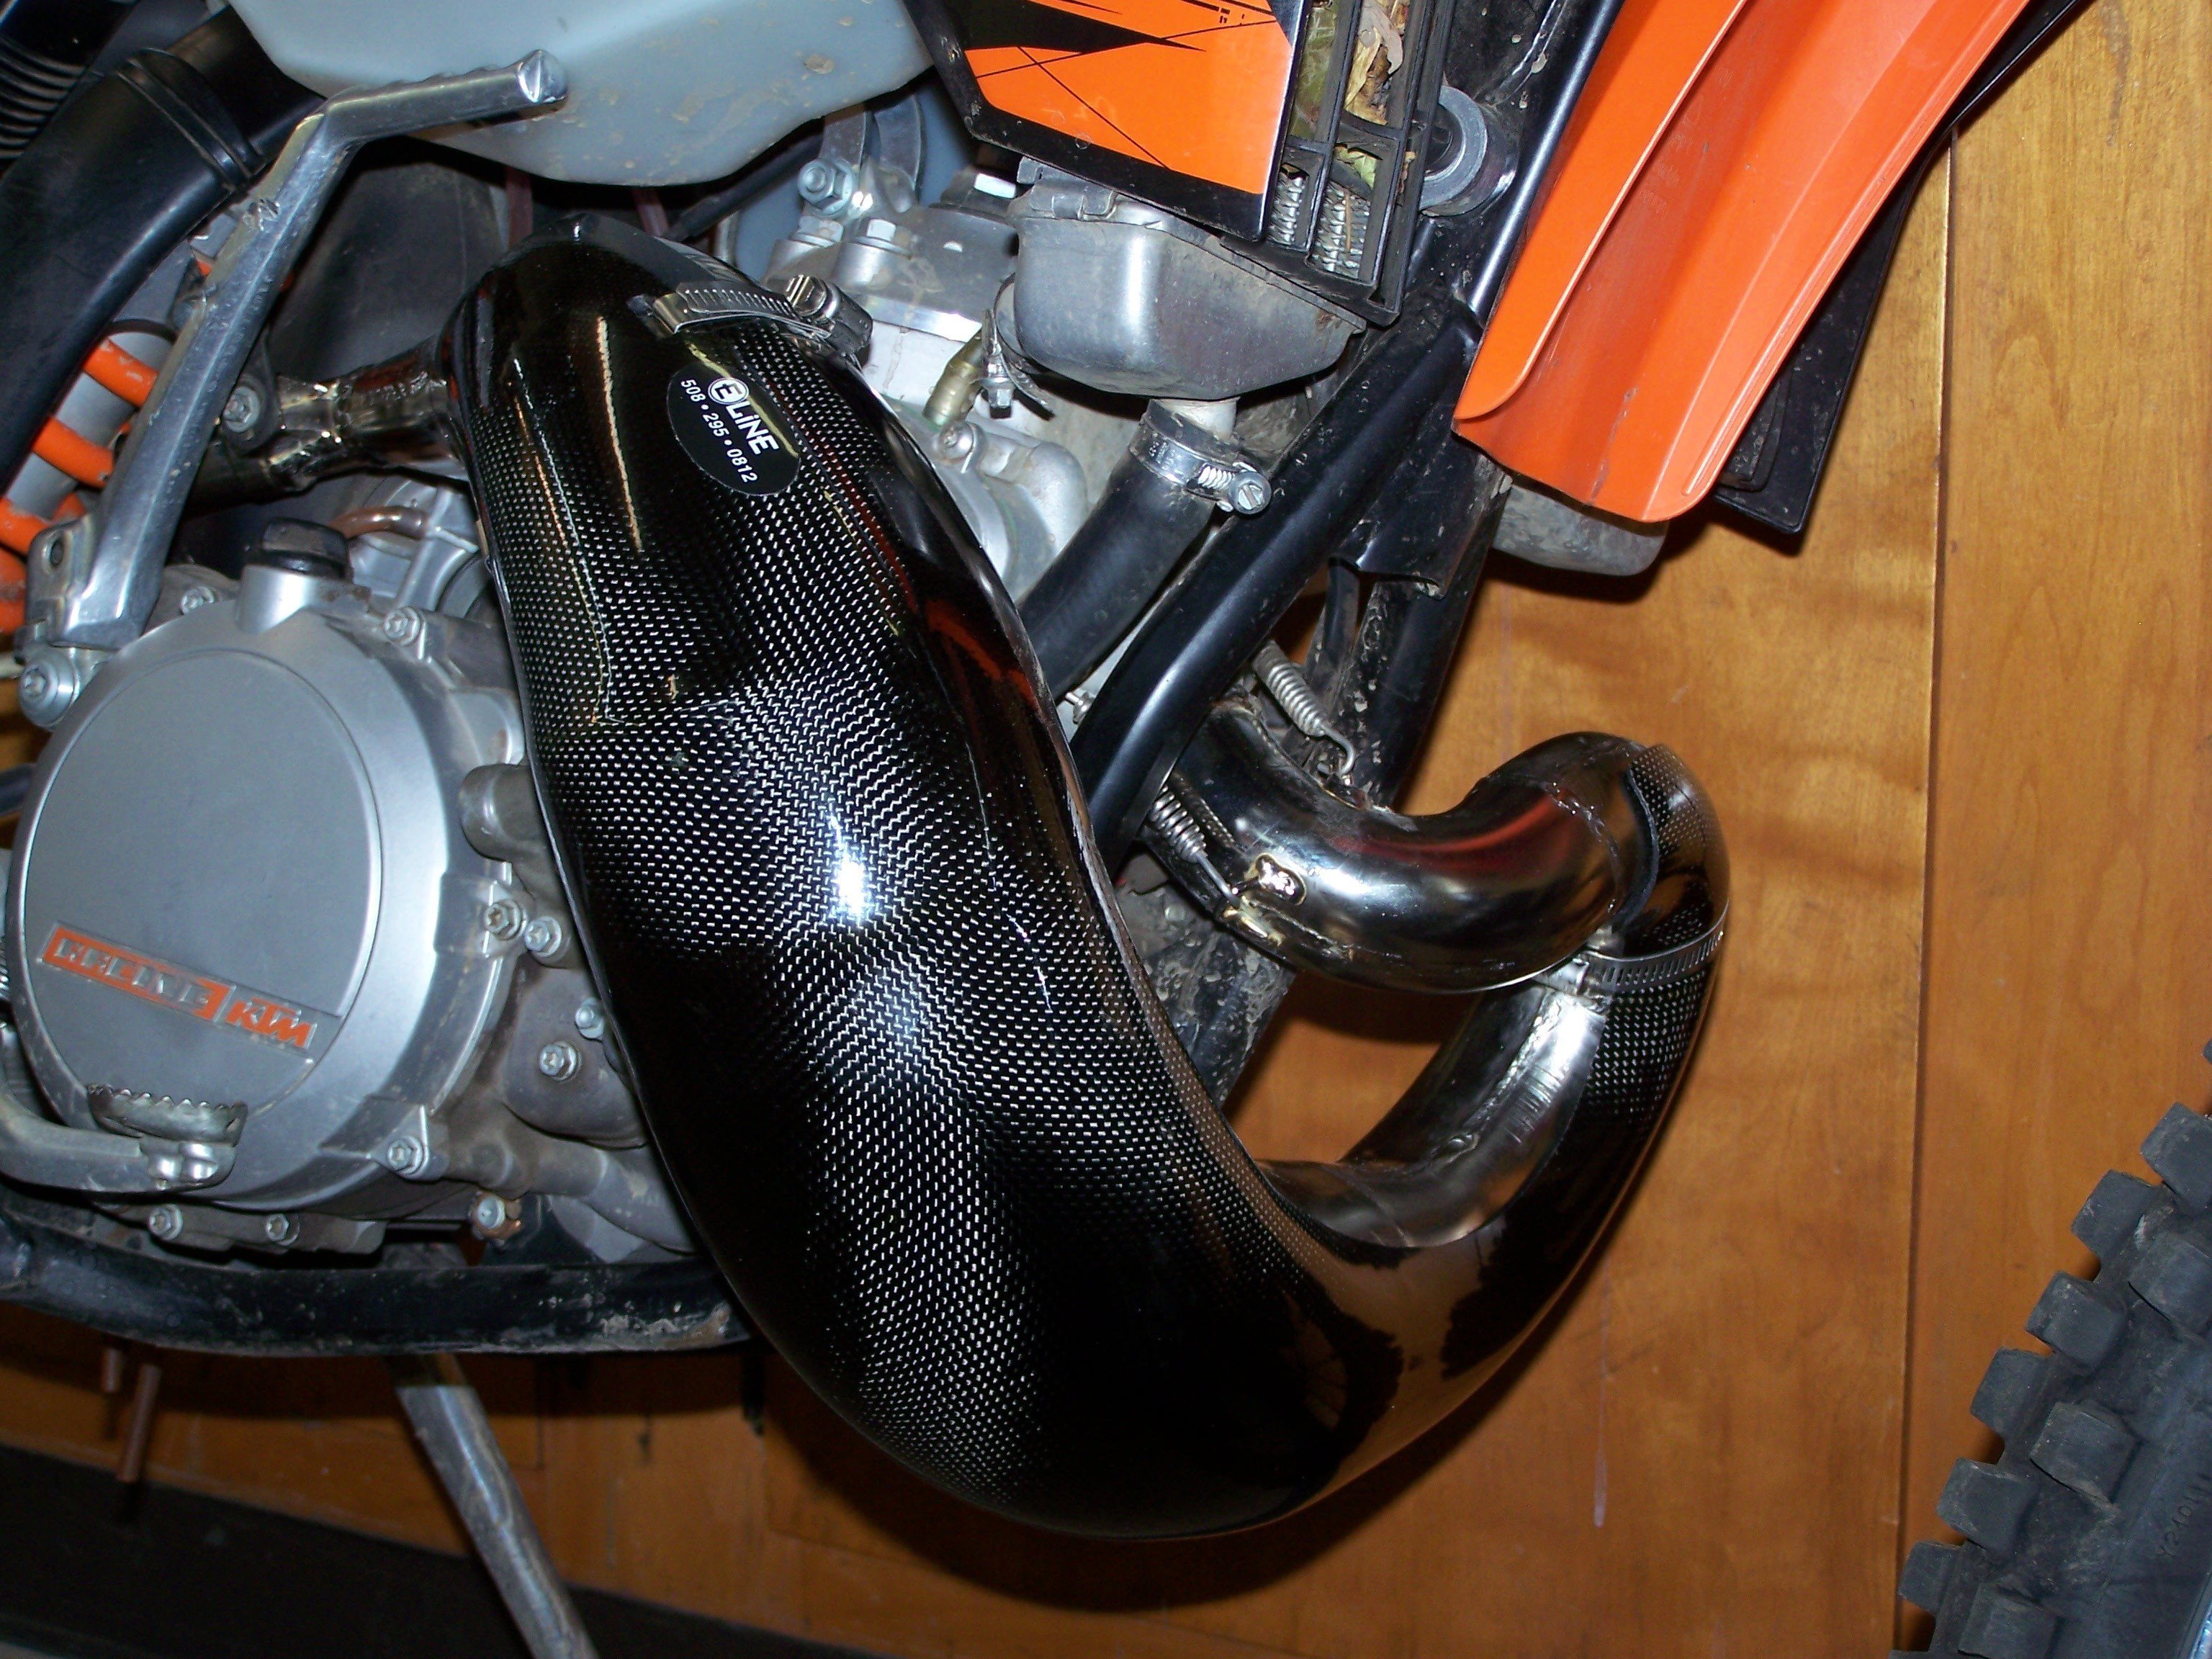 PRO CARBON Exhaust Header Pipe Guard fits OEM KTM SXF250 2016-18 WITH CHAMBER